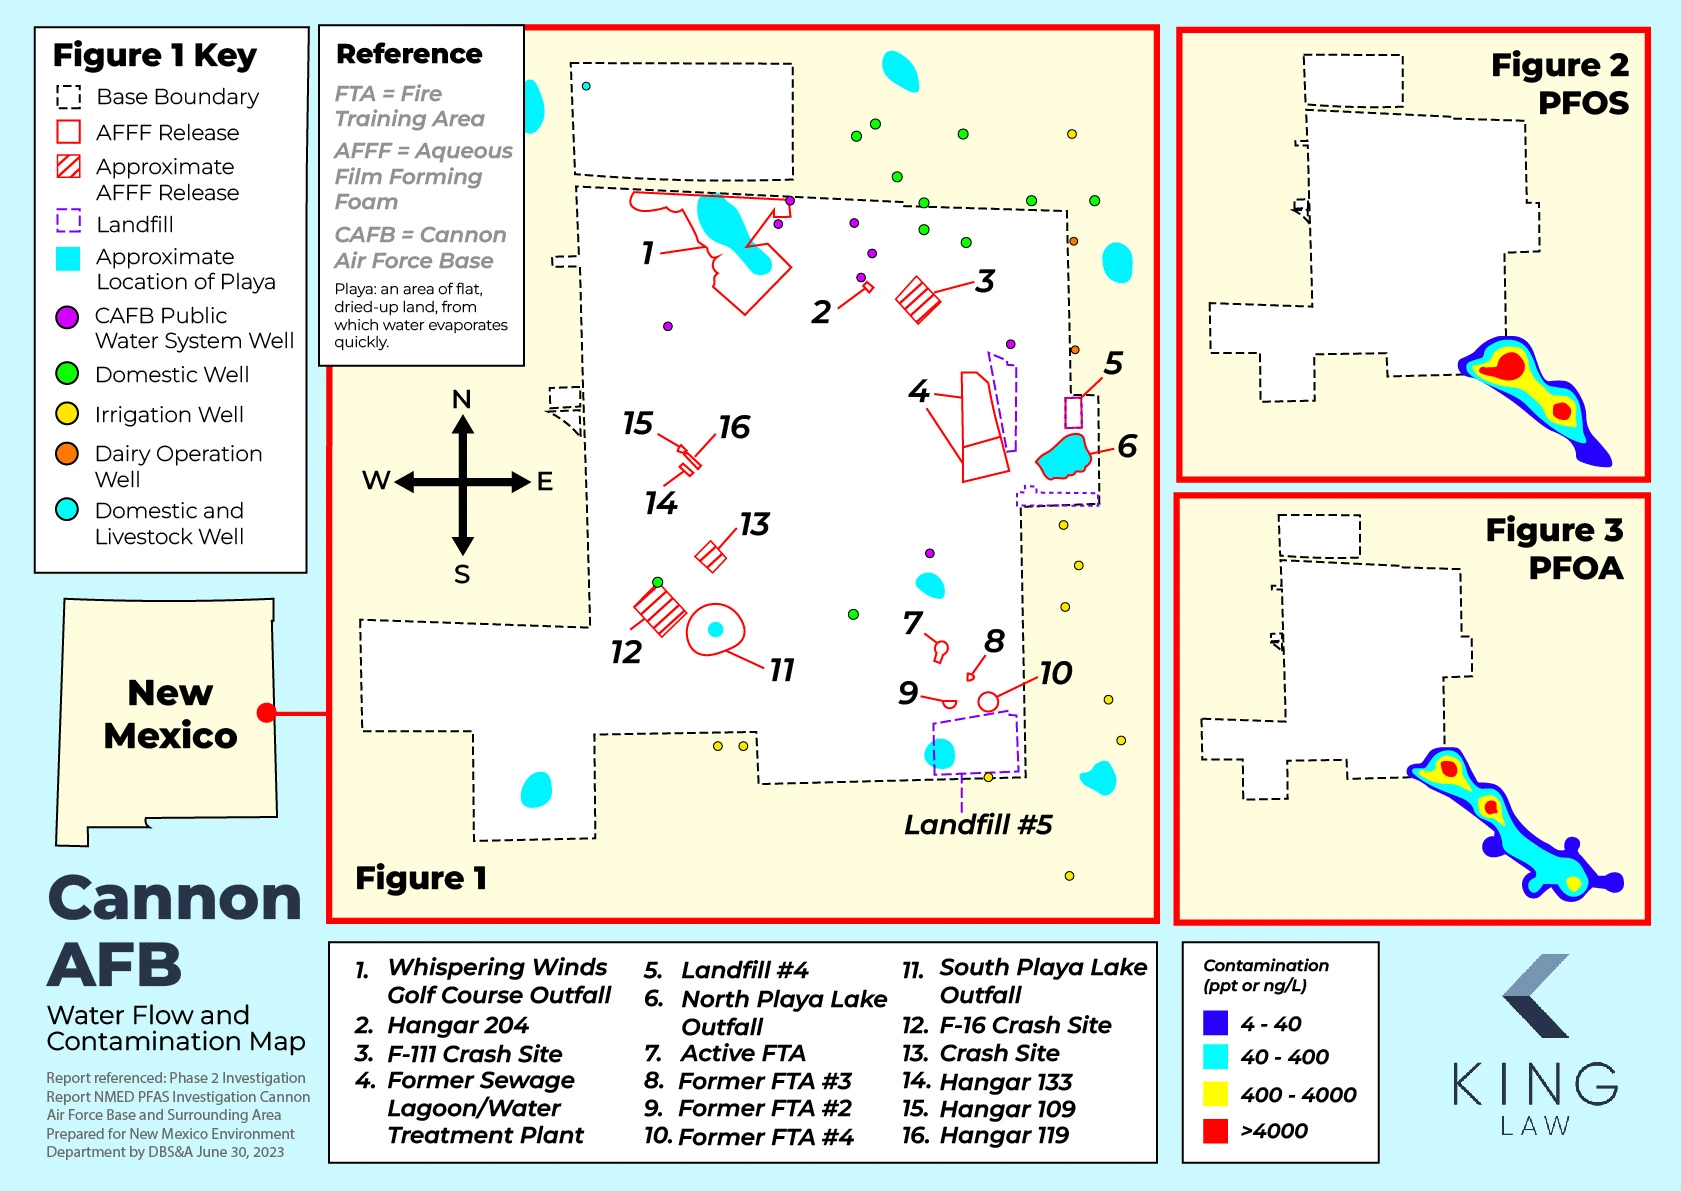 This map shows the known areas of AFFF release on Cannon Air Force Base and the contamination of PFOS and PFOA off base. 